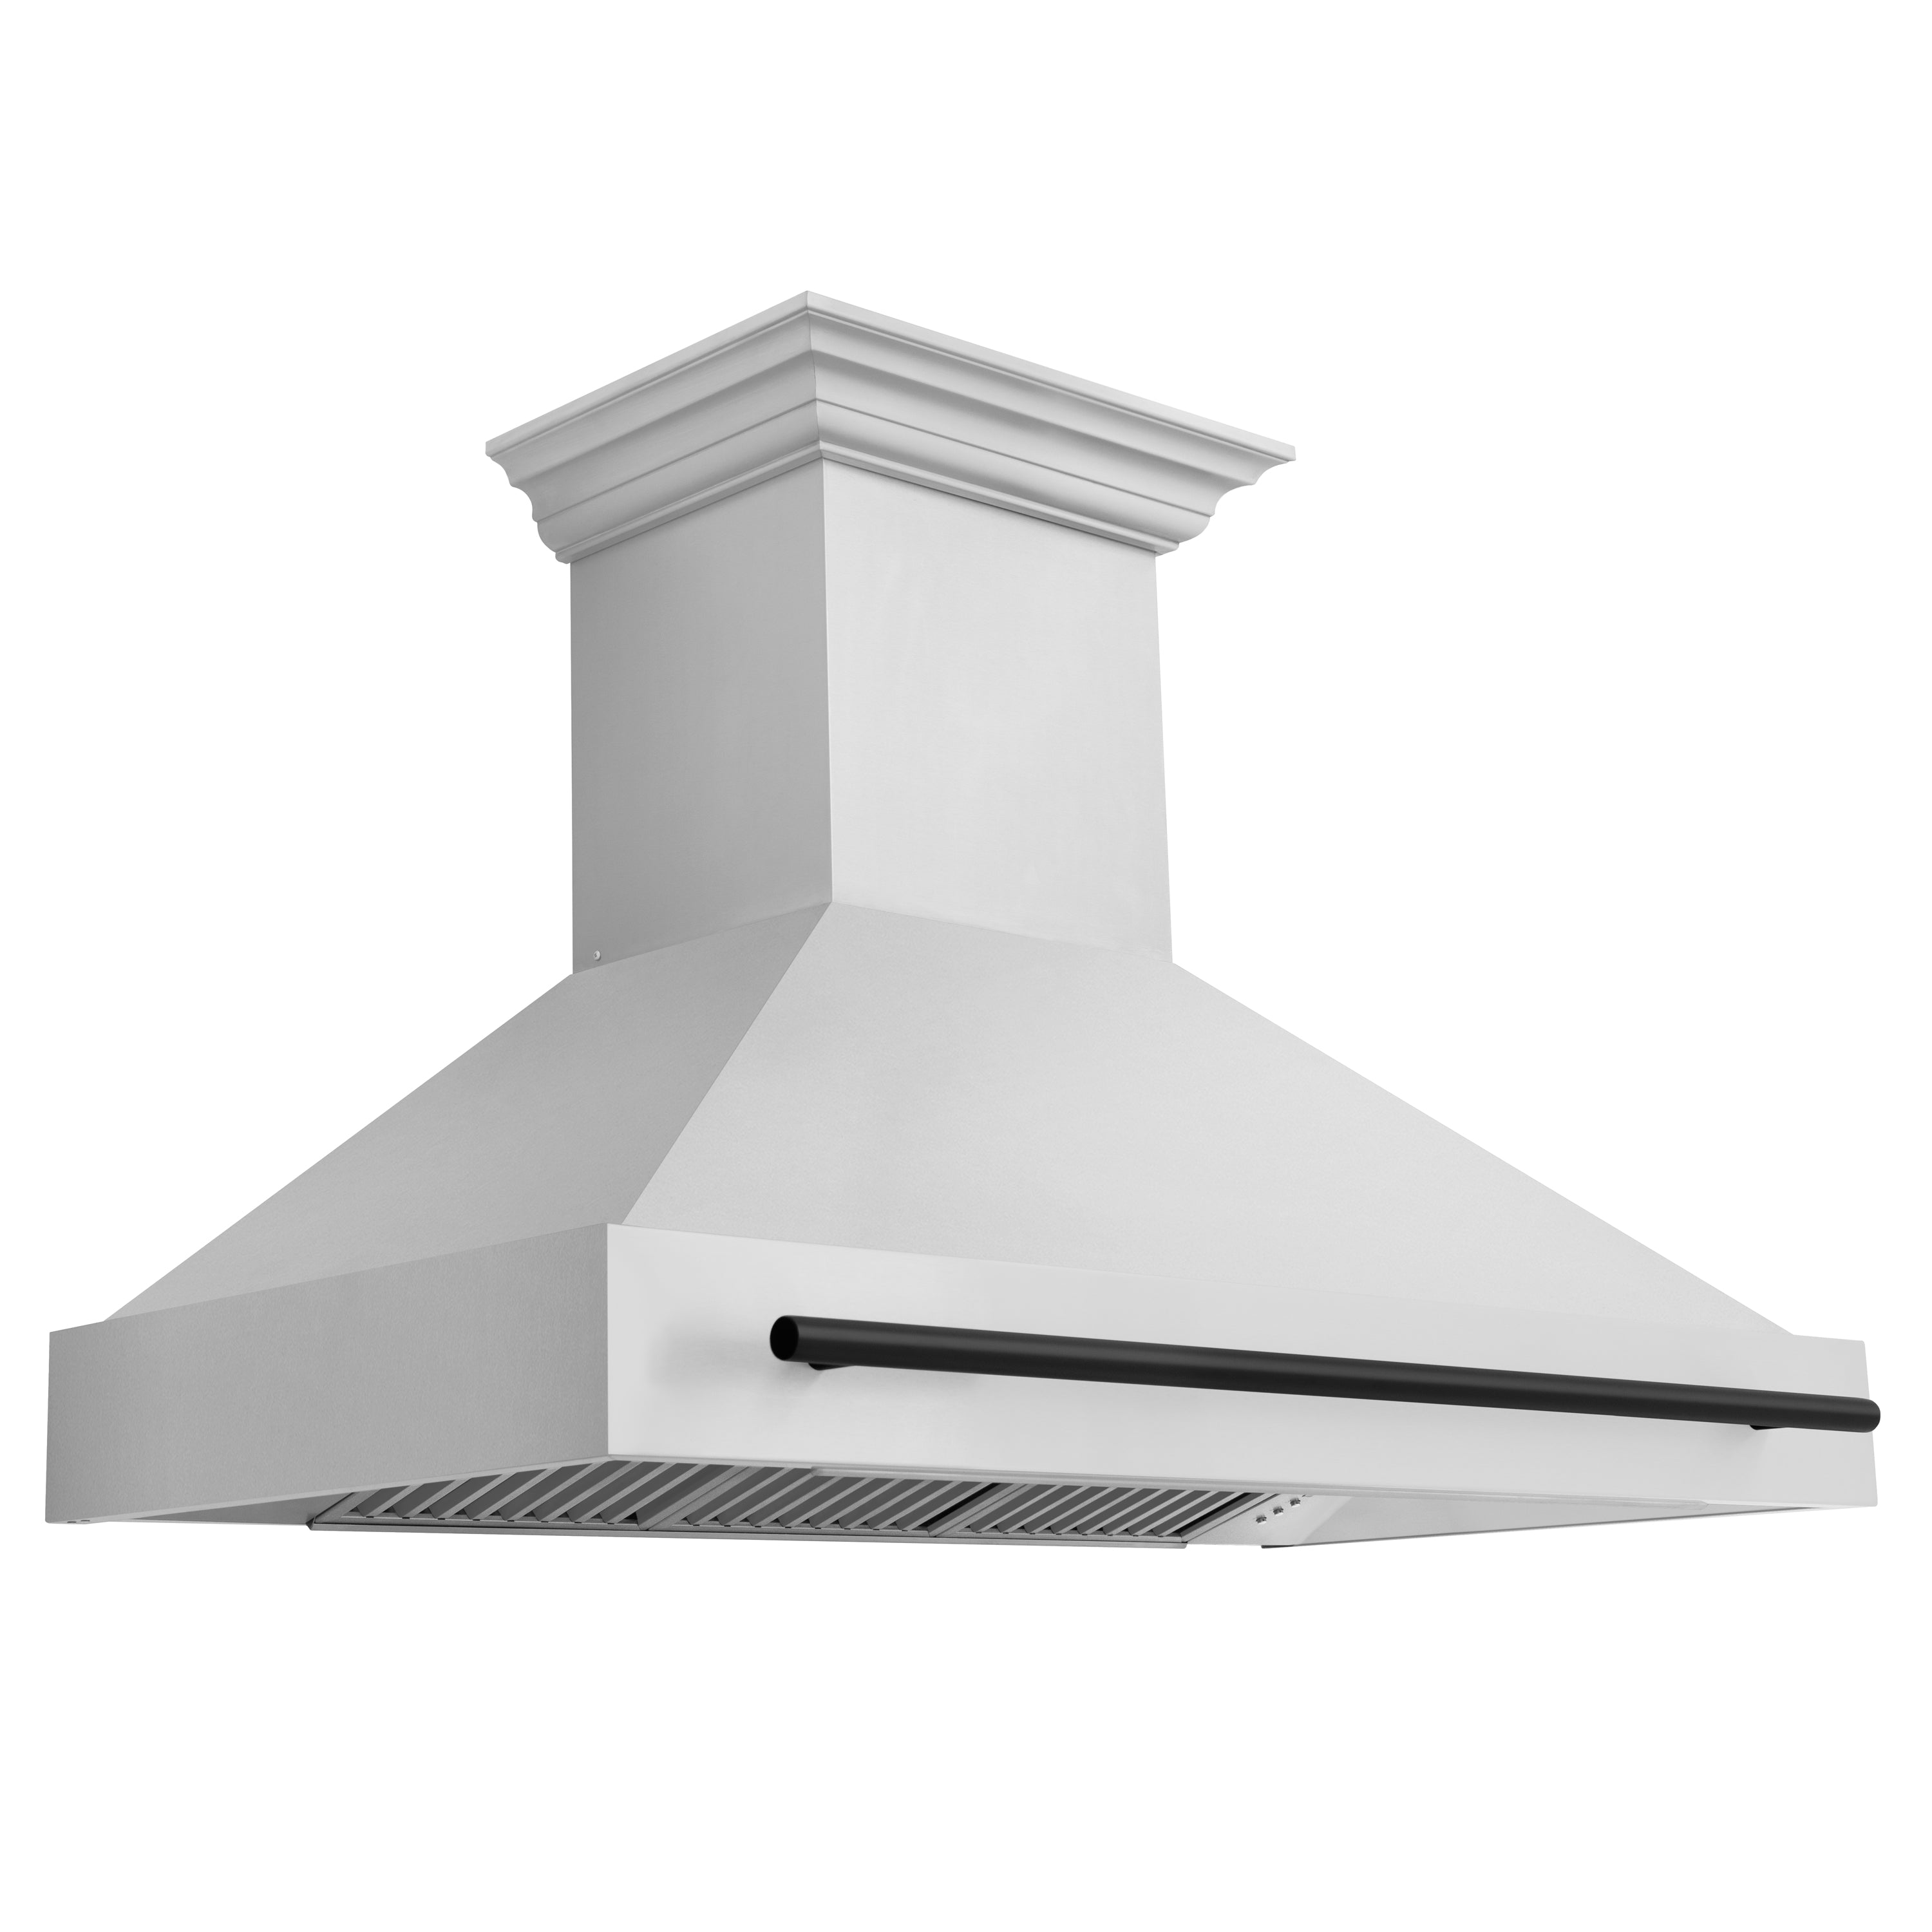 ZLINE 48" Autograph Edition Stainless Steel Range Hood with Stainless Steel Shell and Matte Black Handle (8654STZ-48-MB)